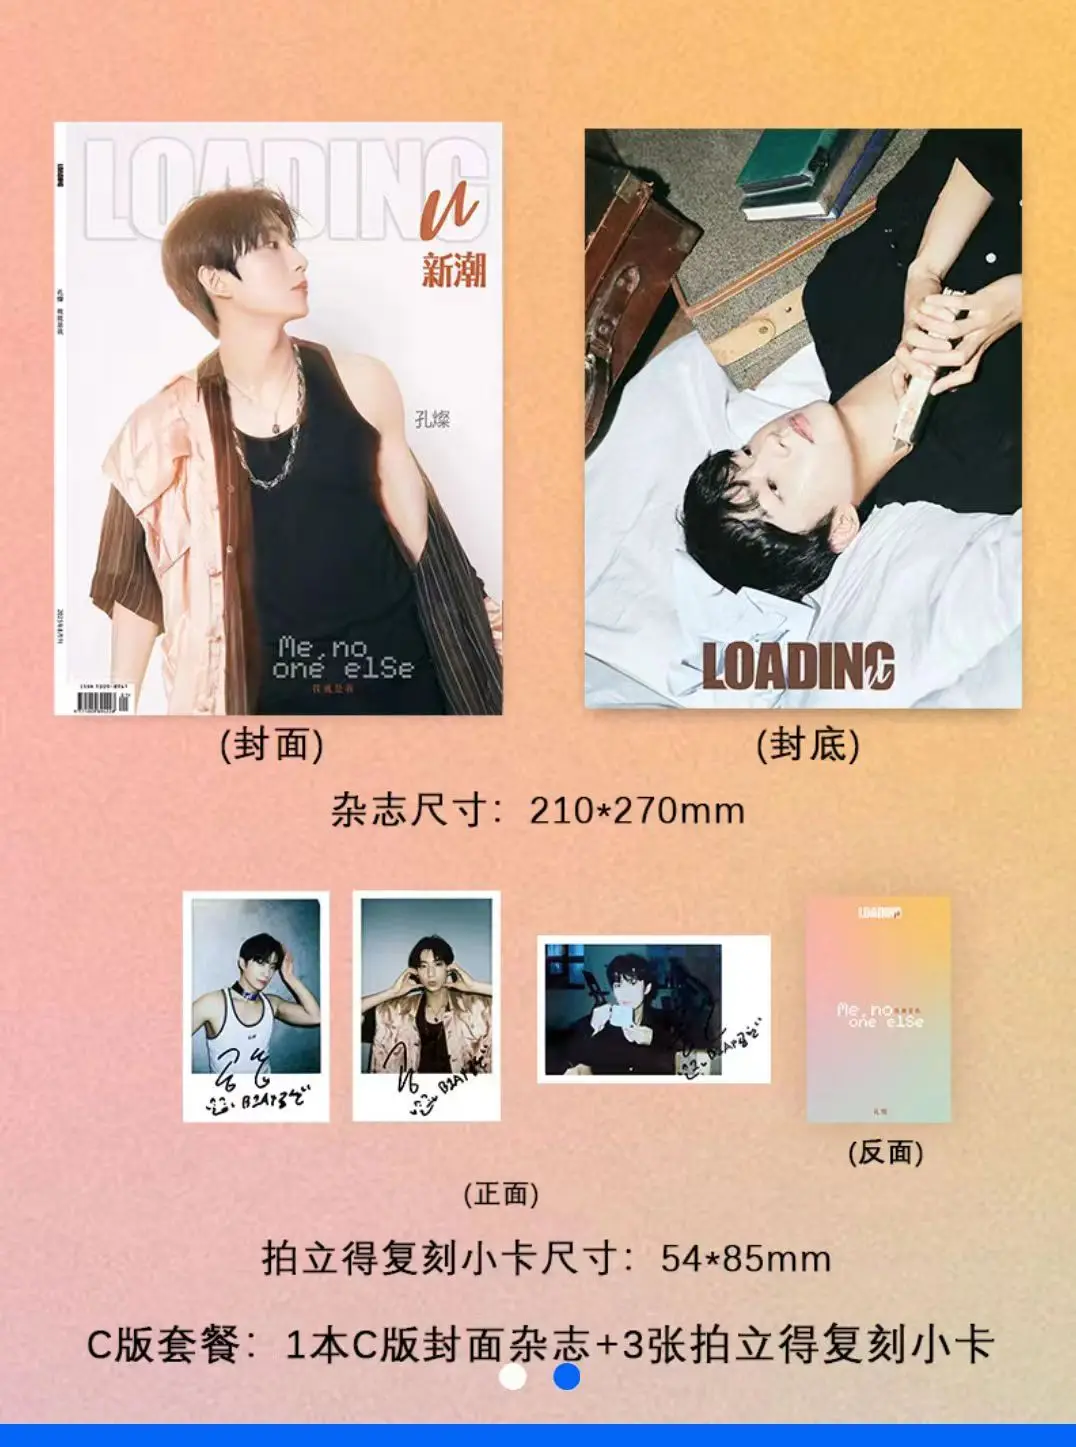 

Korean Actor Loading Magazine Cover Kong Can Me,Ni One Else Magazine Photo Fashion Magazines Postcards Poster Photo Book Cards